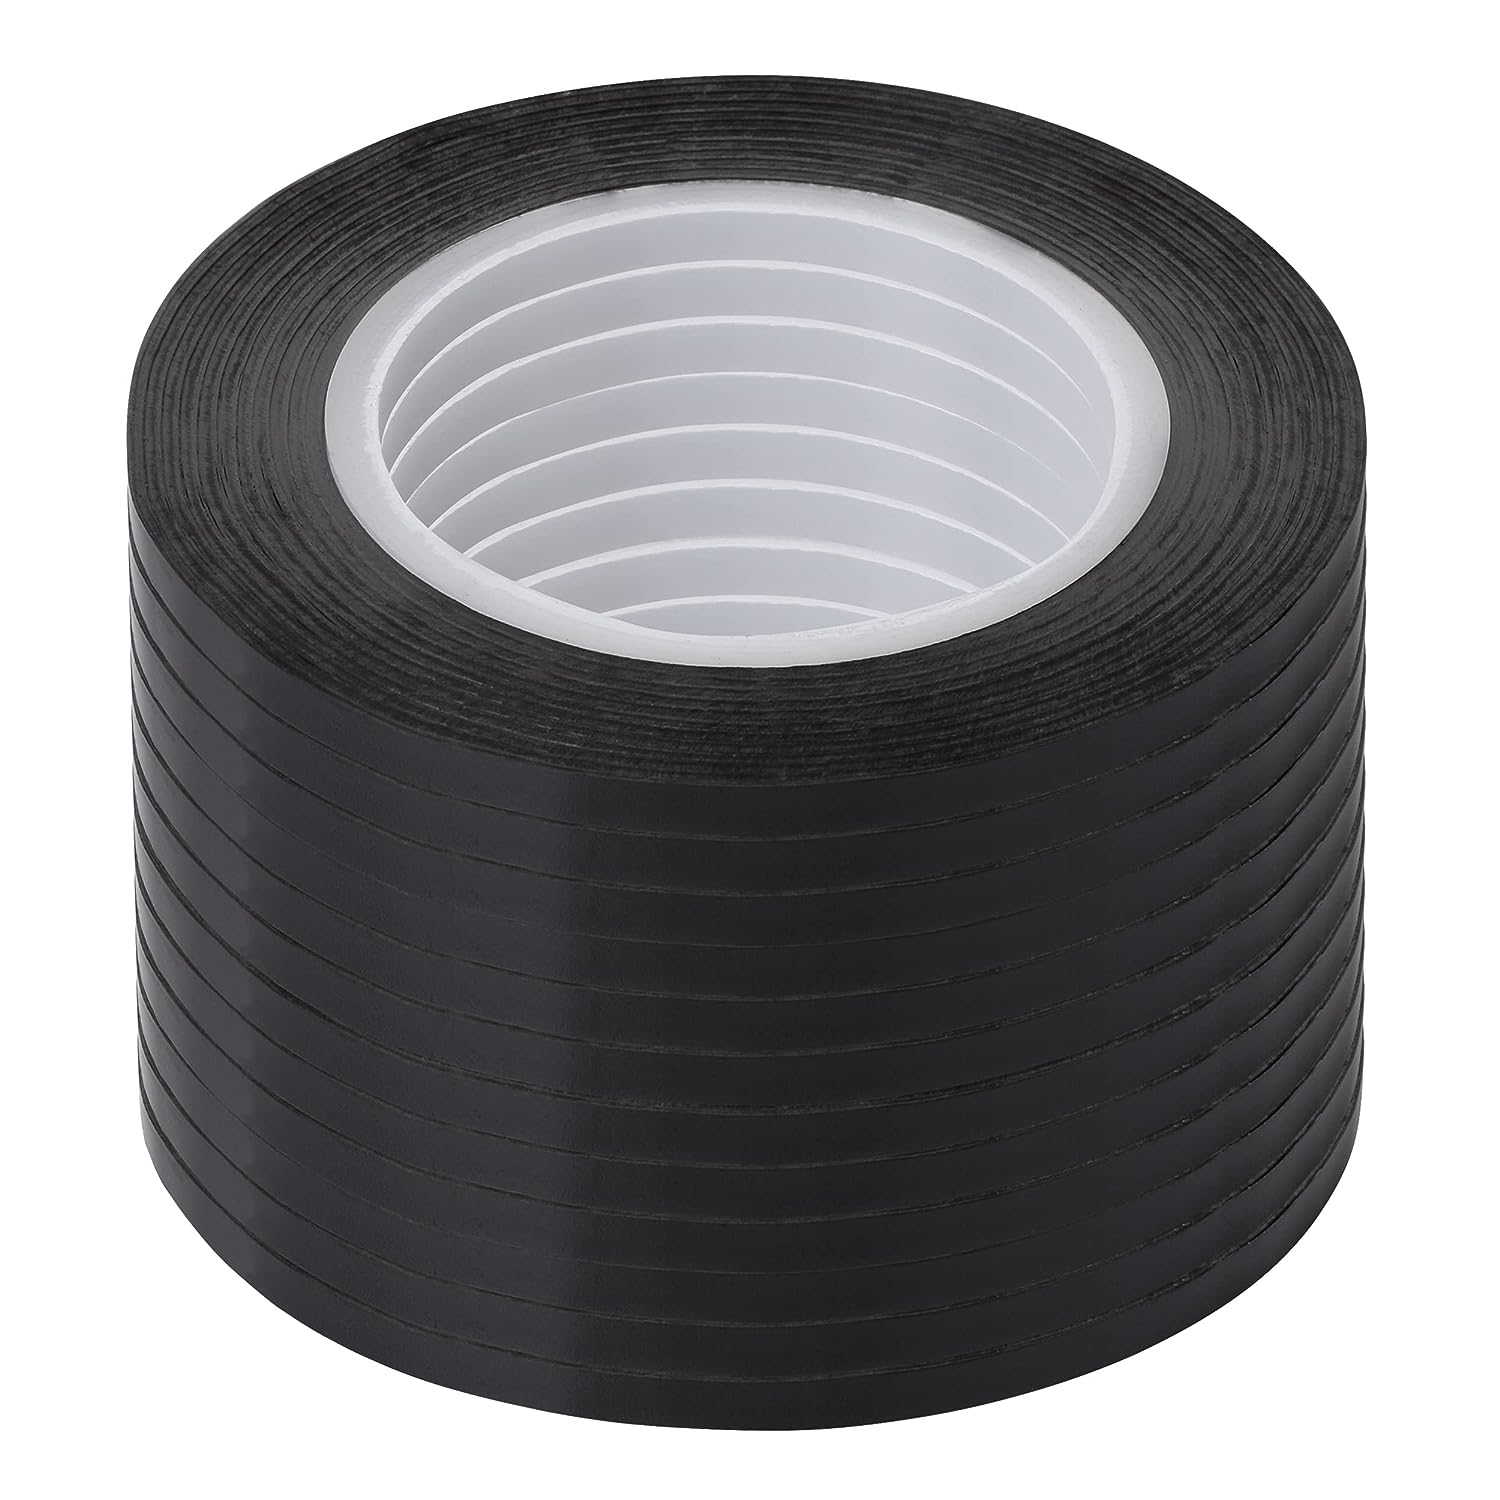 Whiteboard Pinstripe Tape 6 Rolls 1/8 Thin White Board Dry Erase Line  Gridding Tape (Color)